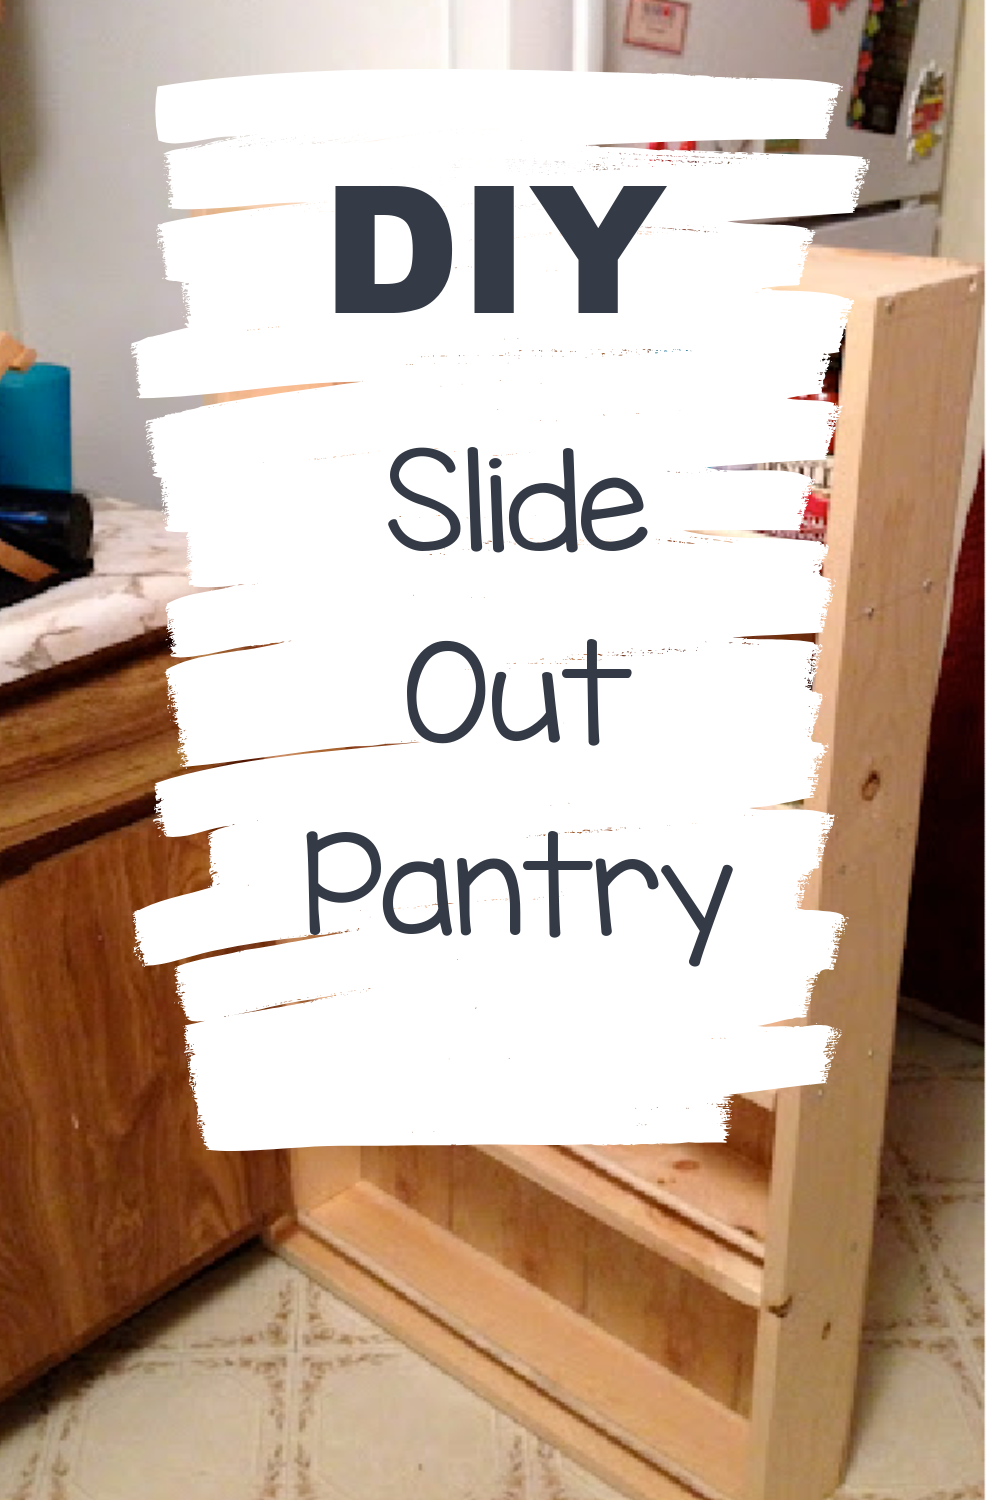 Build a DIY Slide Out Pantry